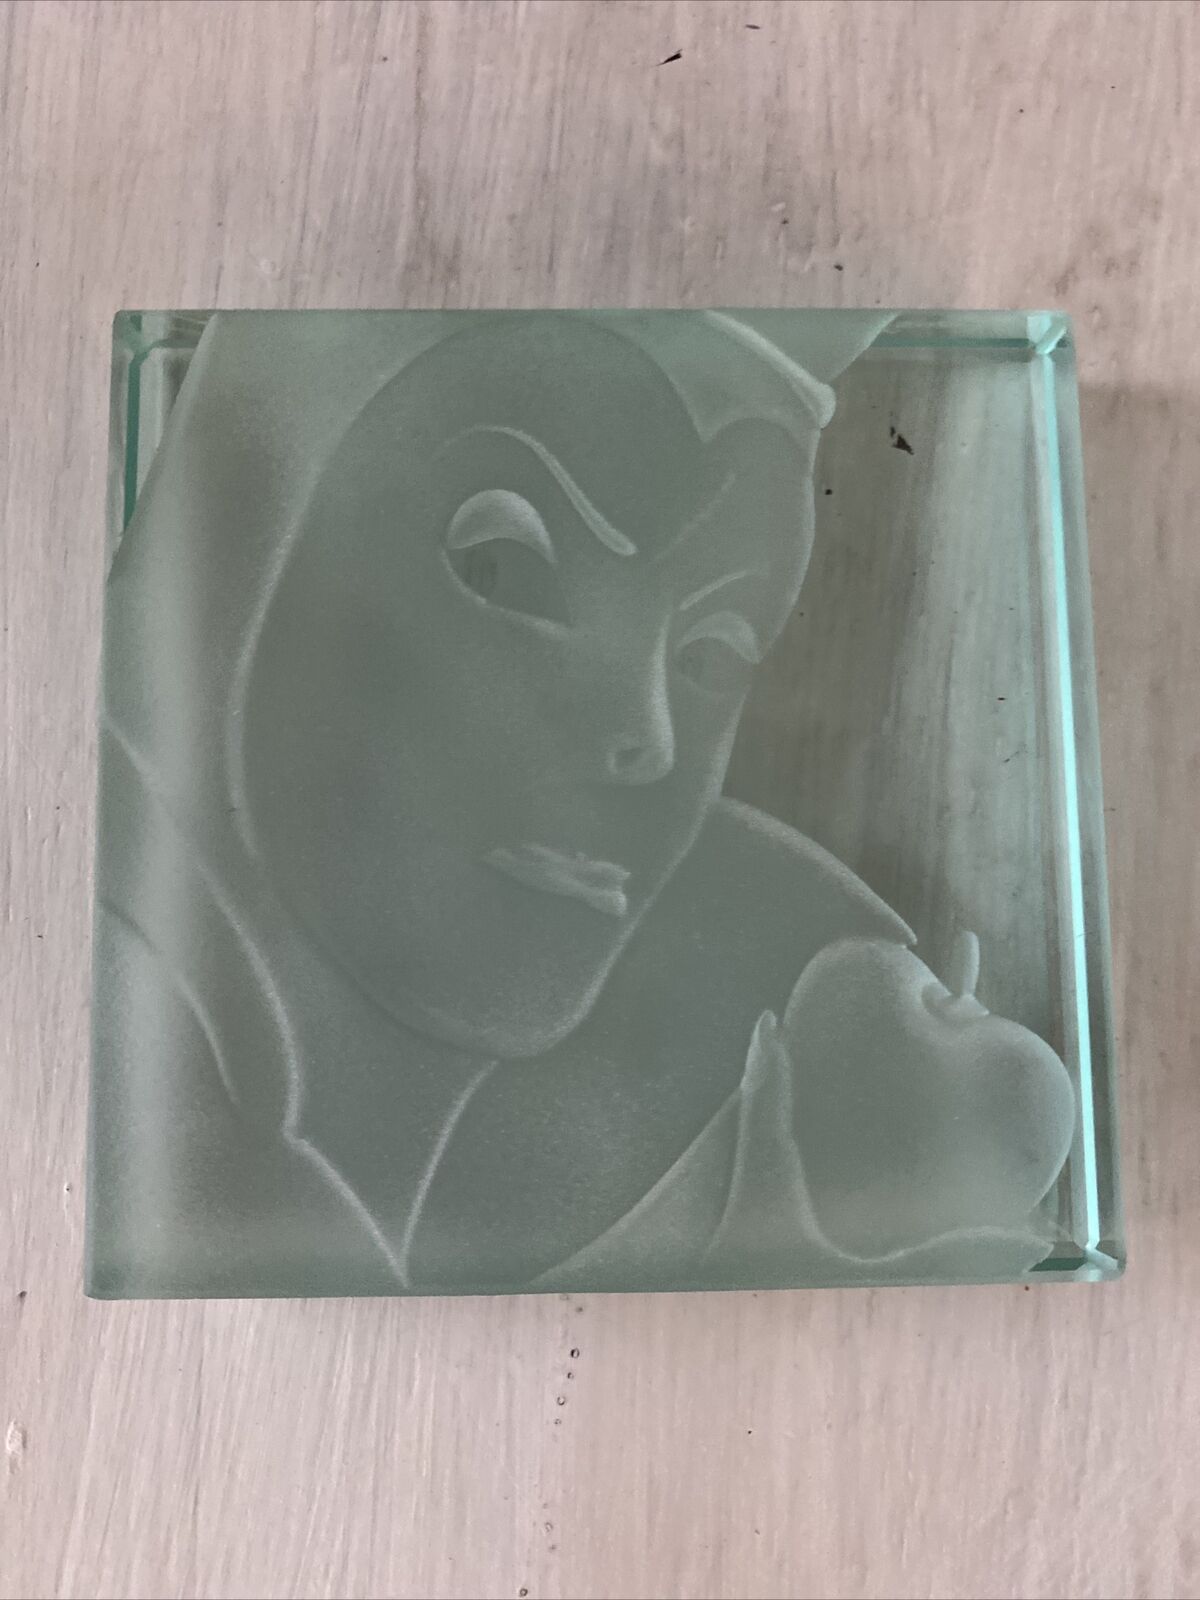 DISNEY #6/1000 R. GUENTHER Evil Queen Snow White  Etched GLASS PAPERWEIGHT